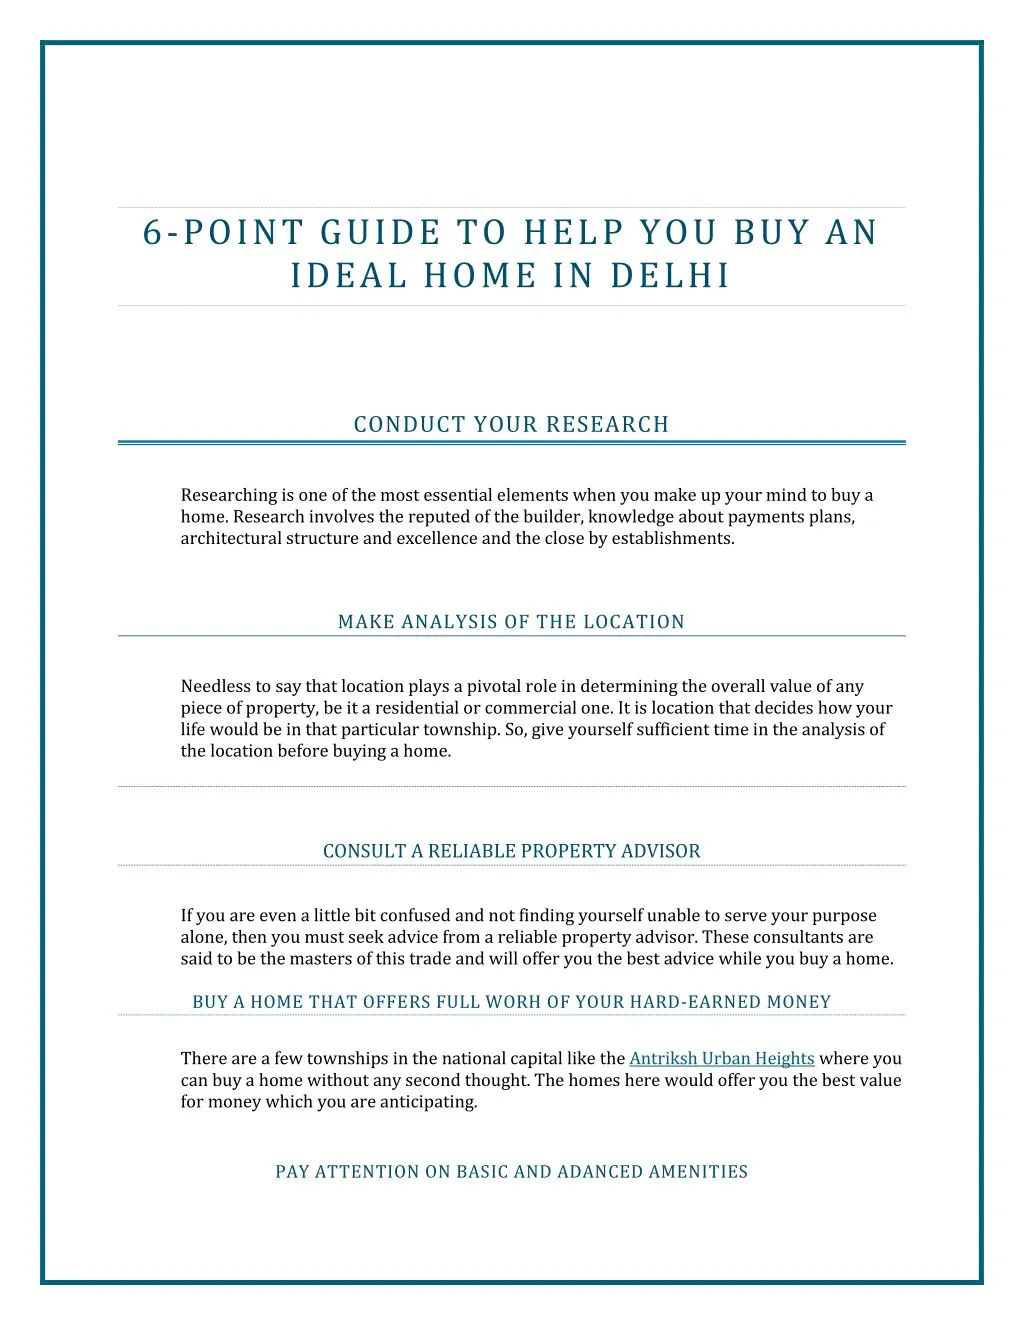 6 point guide to help you buy an ideal home